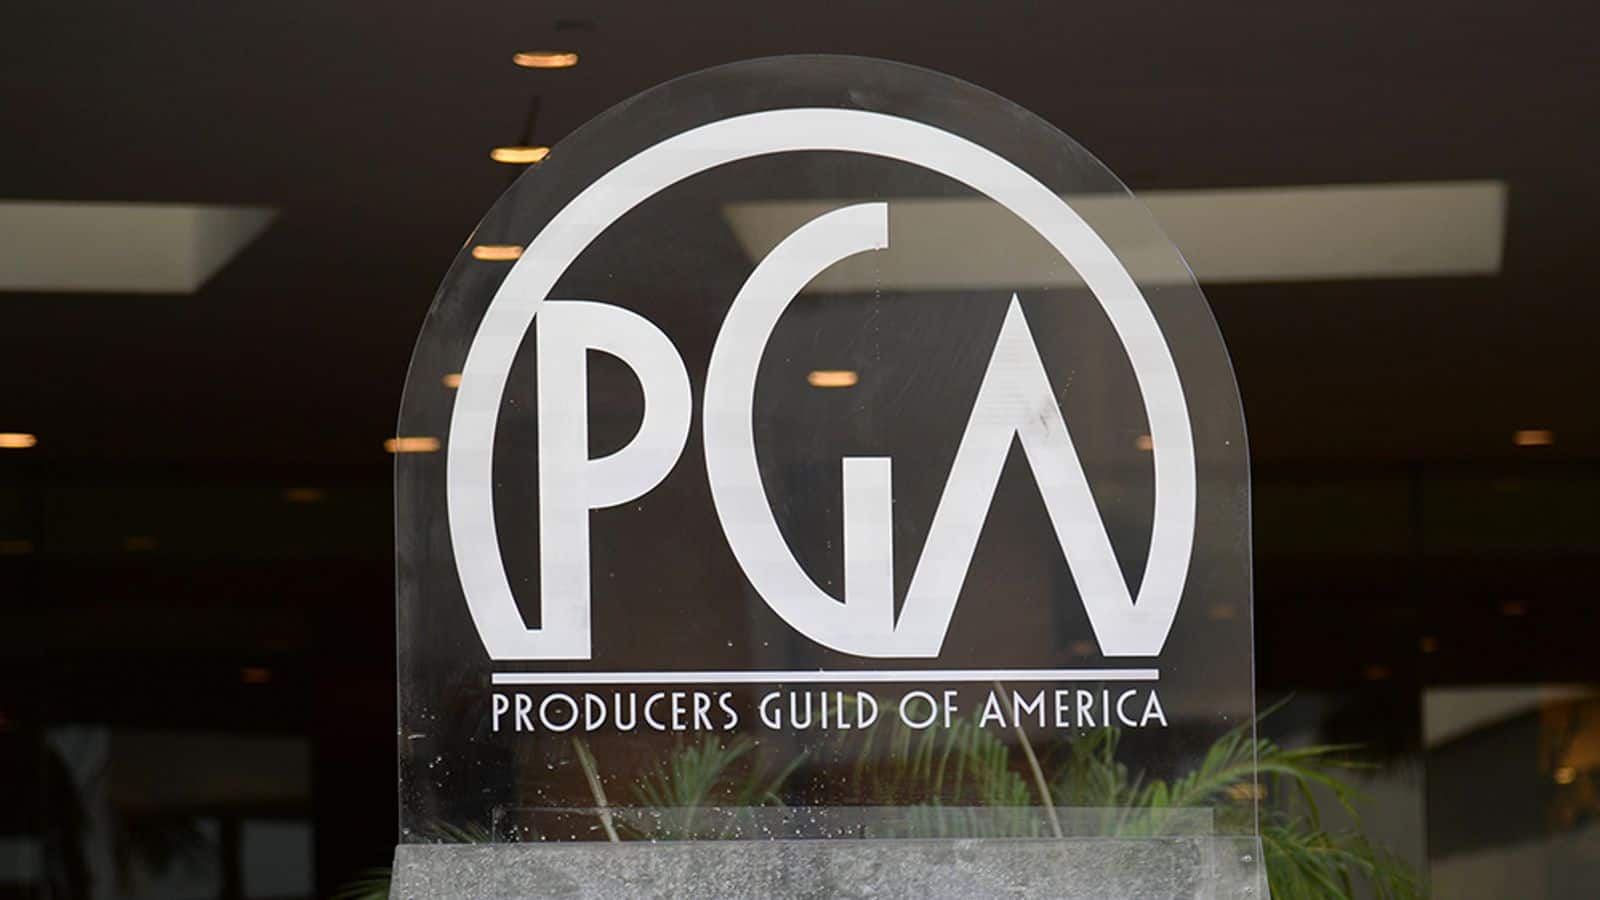 Producers Guild of America locks date, timeline for 36th awards